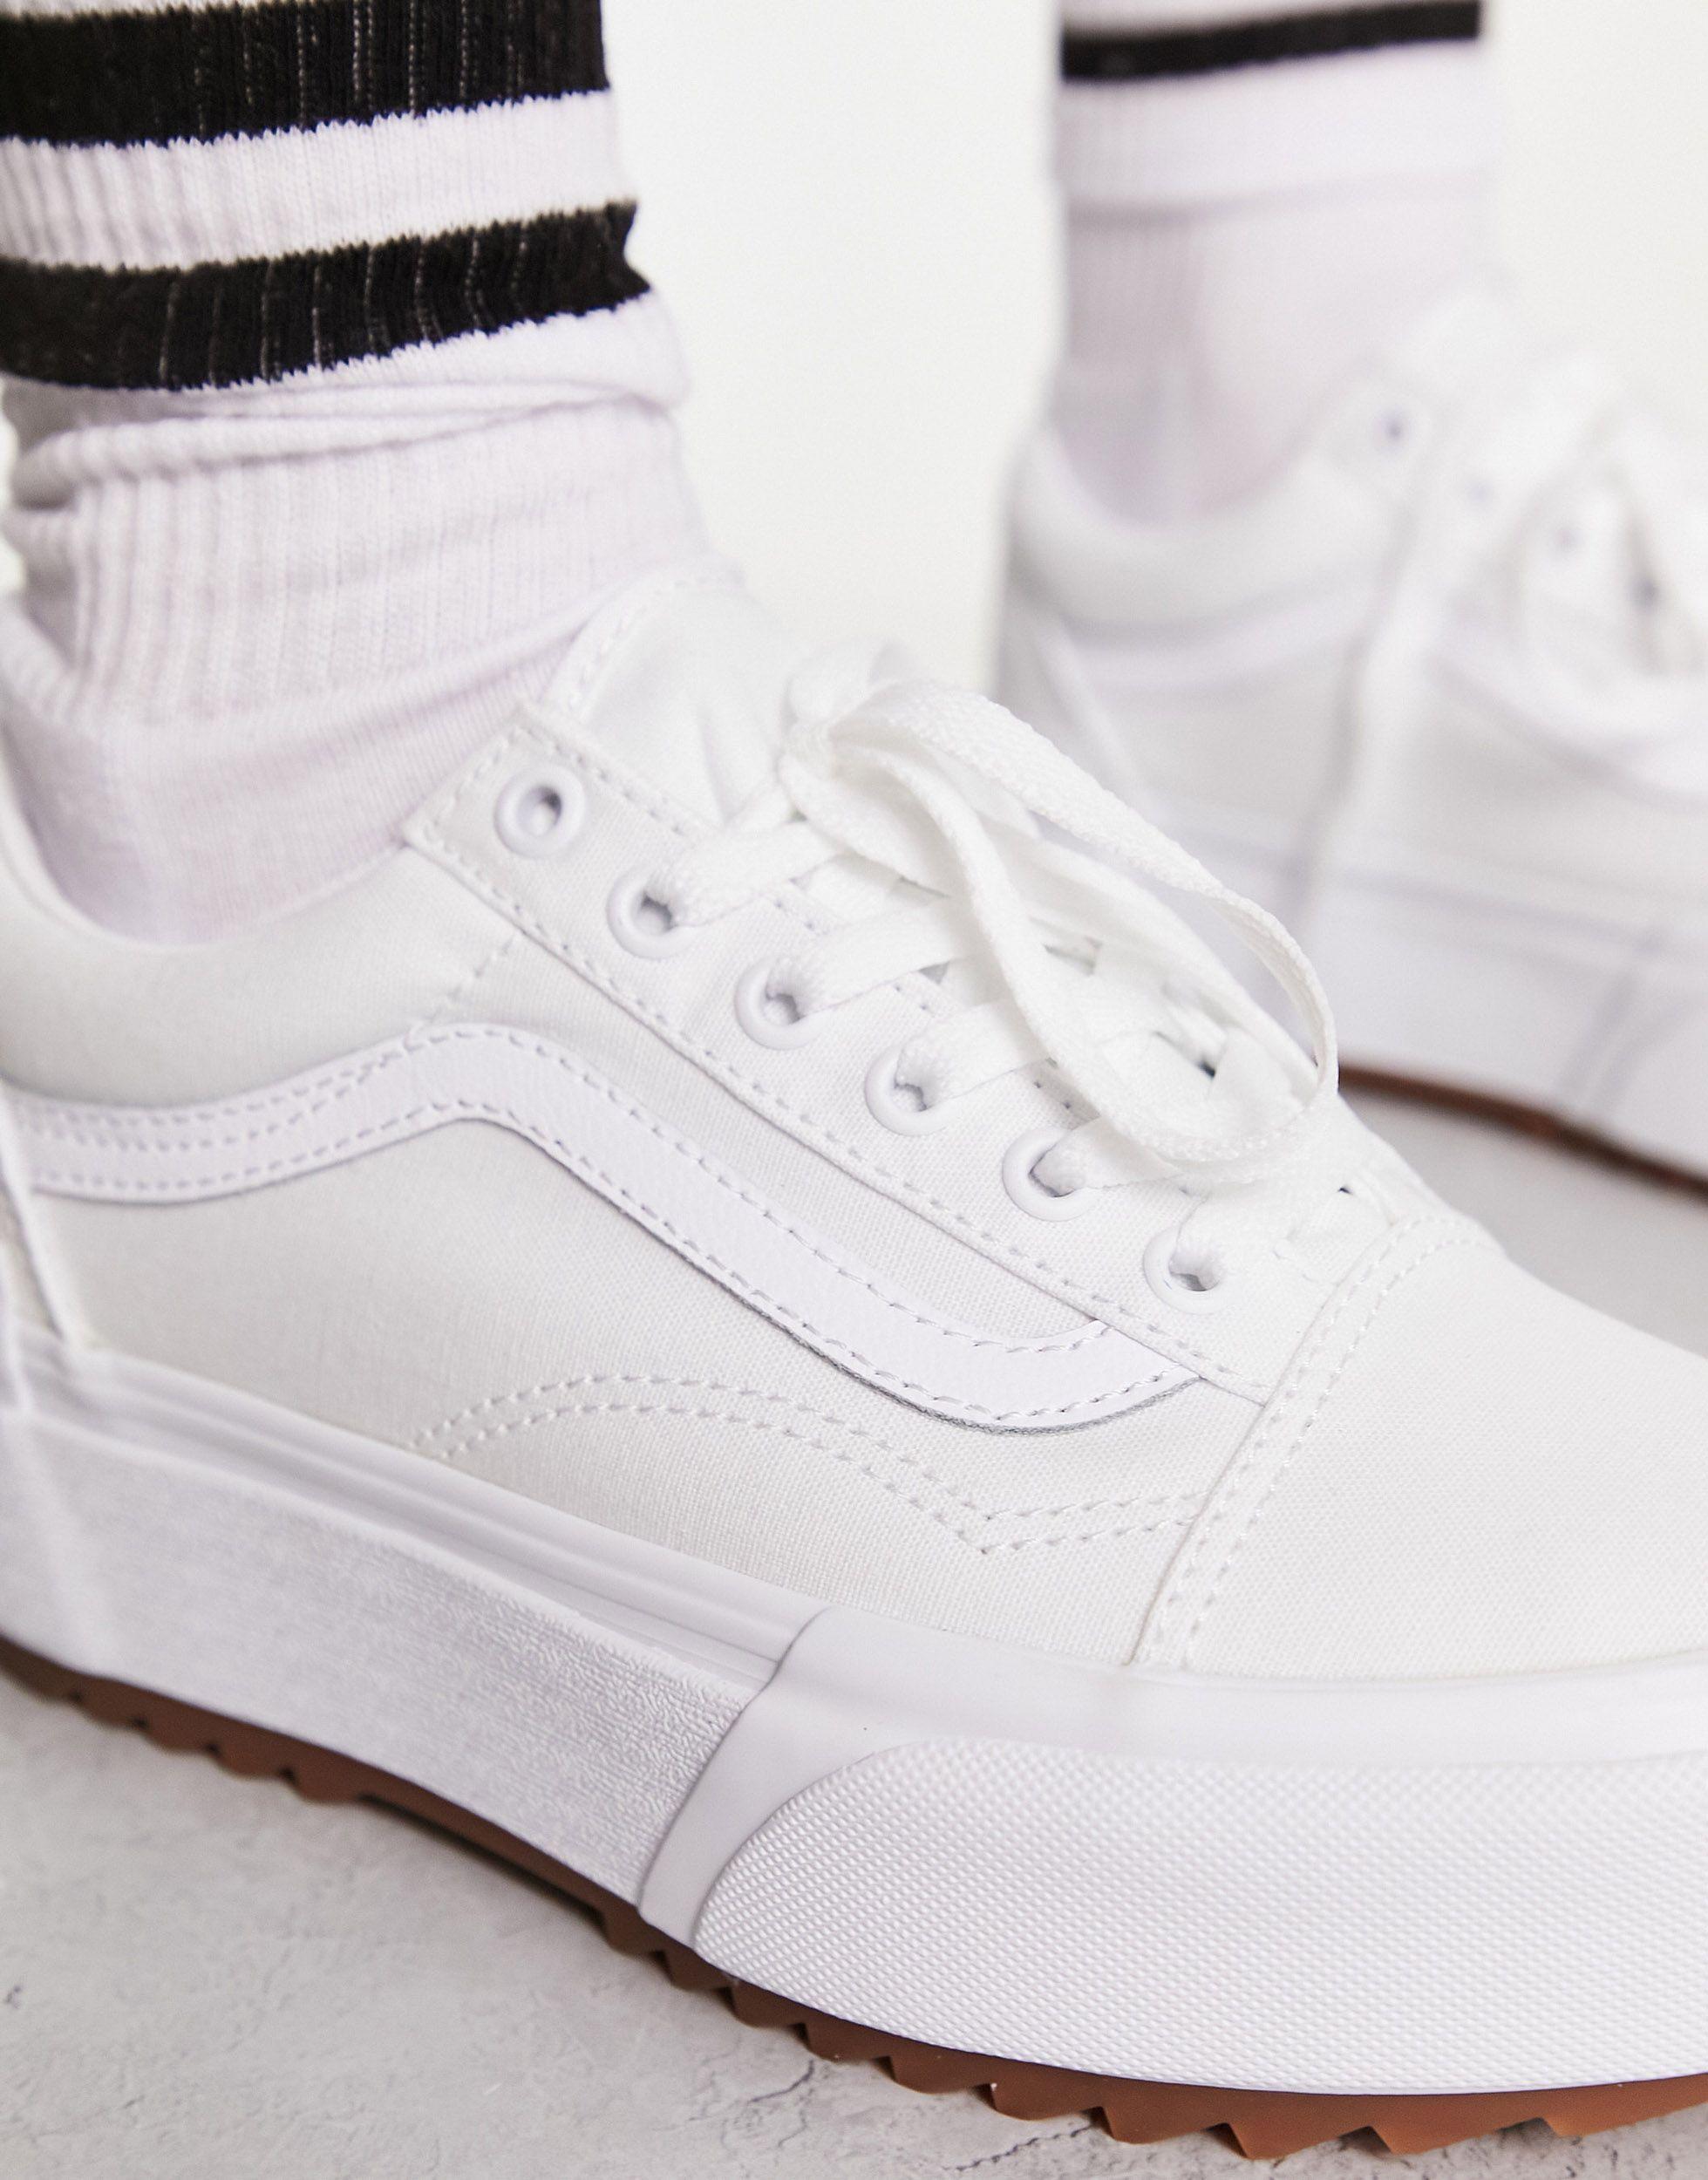 Vans Old Skool Stacked Sneakers With Gum Sole in White | Lyst